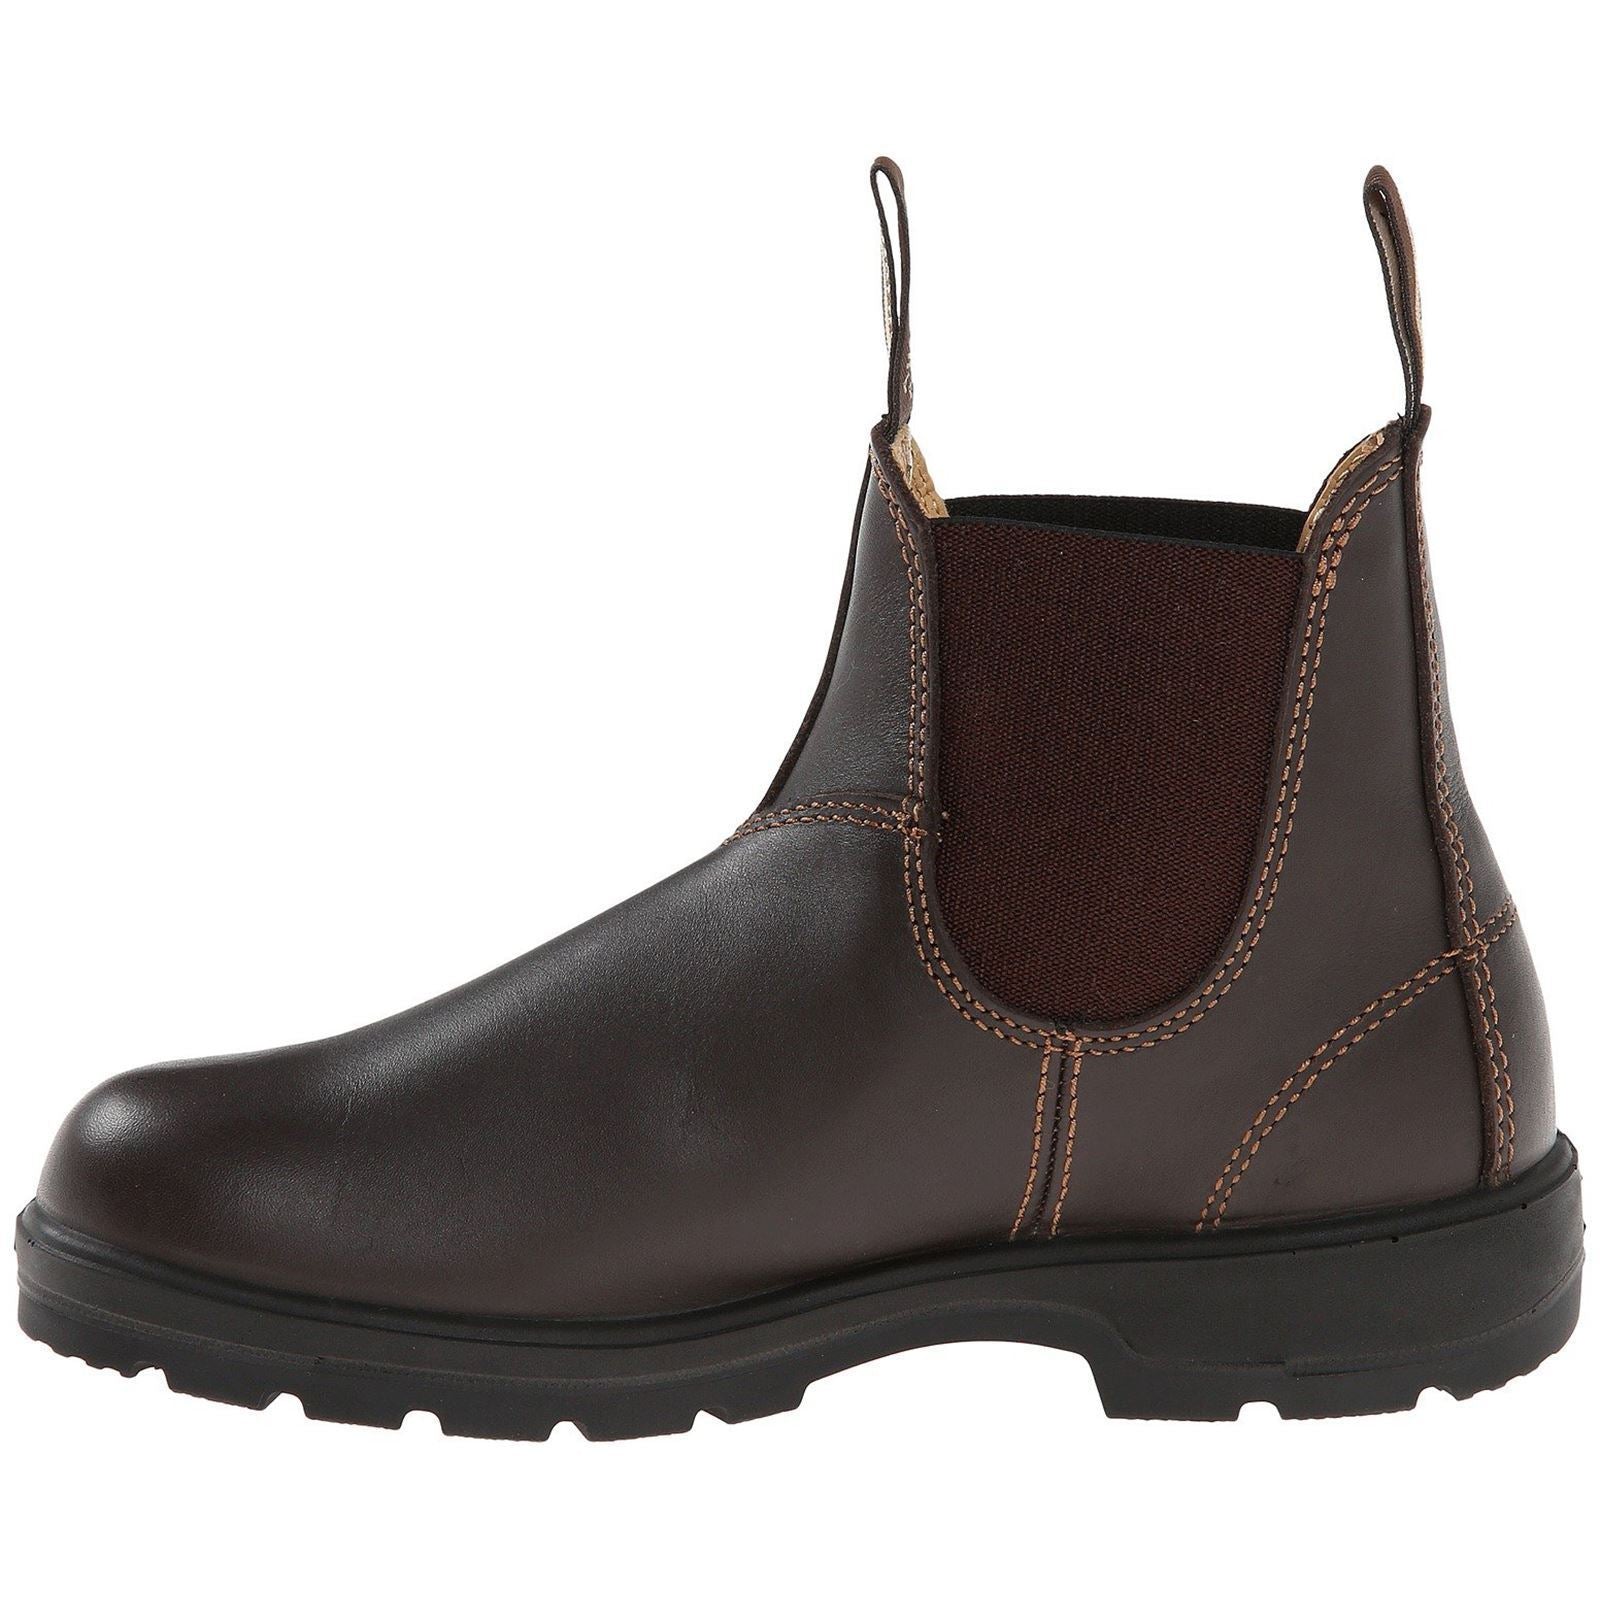 Blundstone 550 Water-Resistant Leather Unisex Chelsea Boots#color_walnut brown